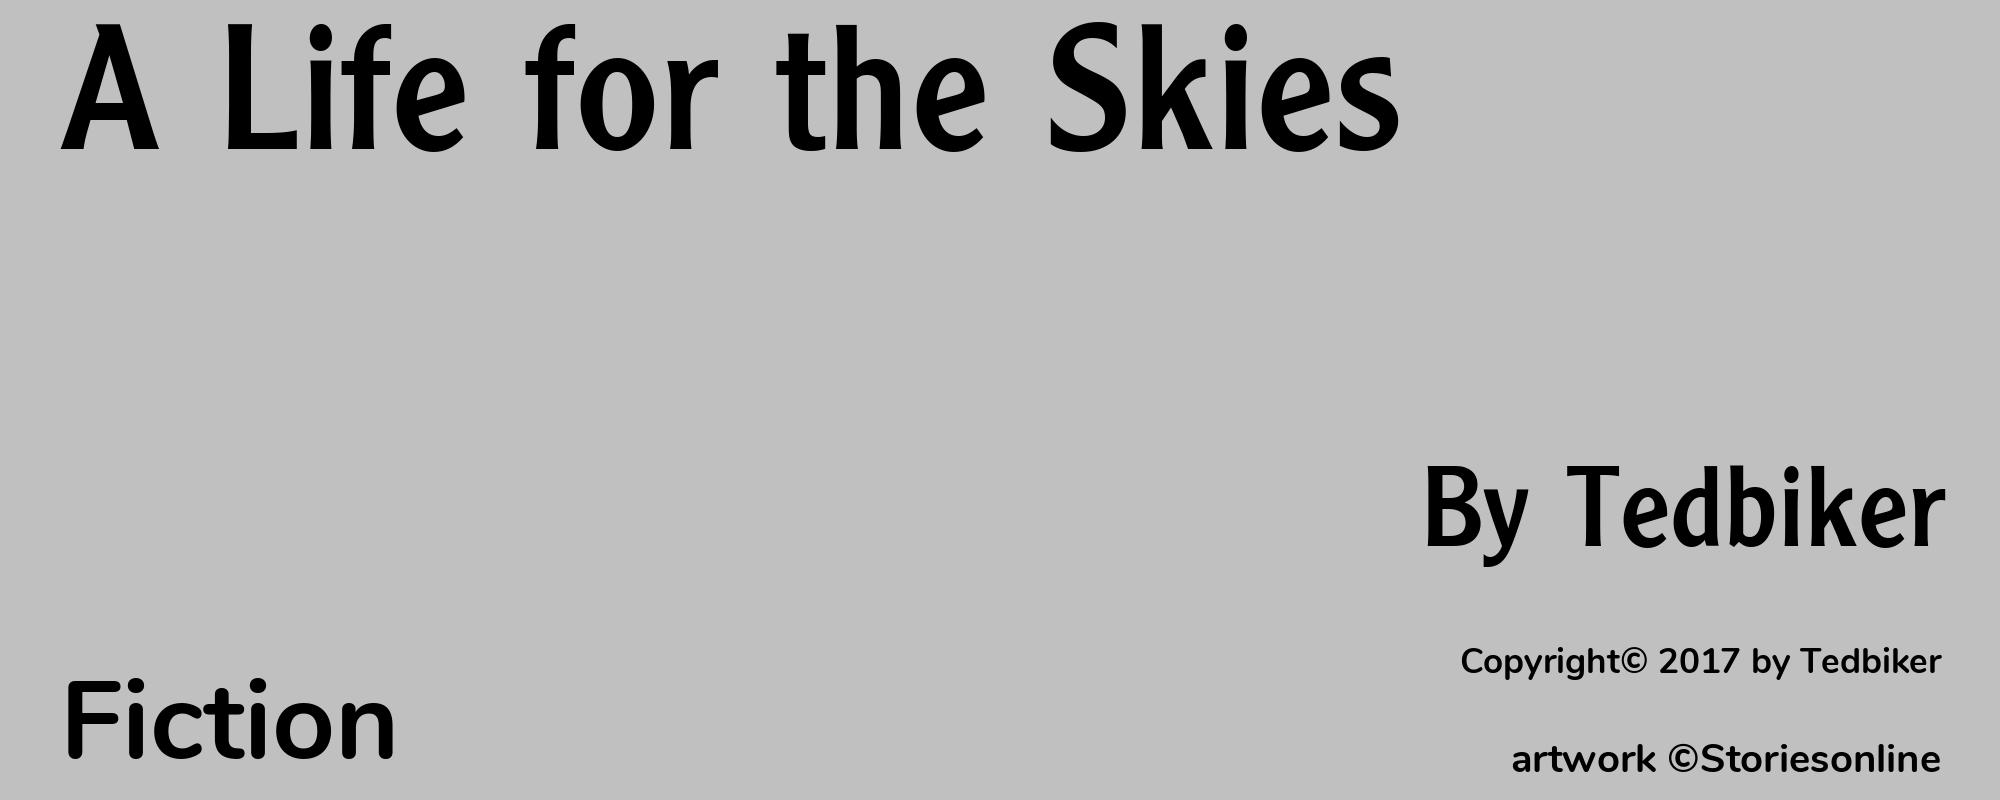 A Life for the Skies - Cover